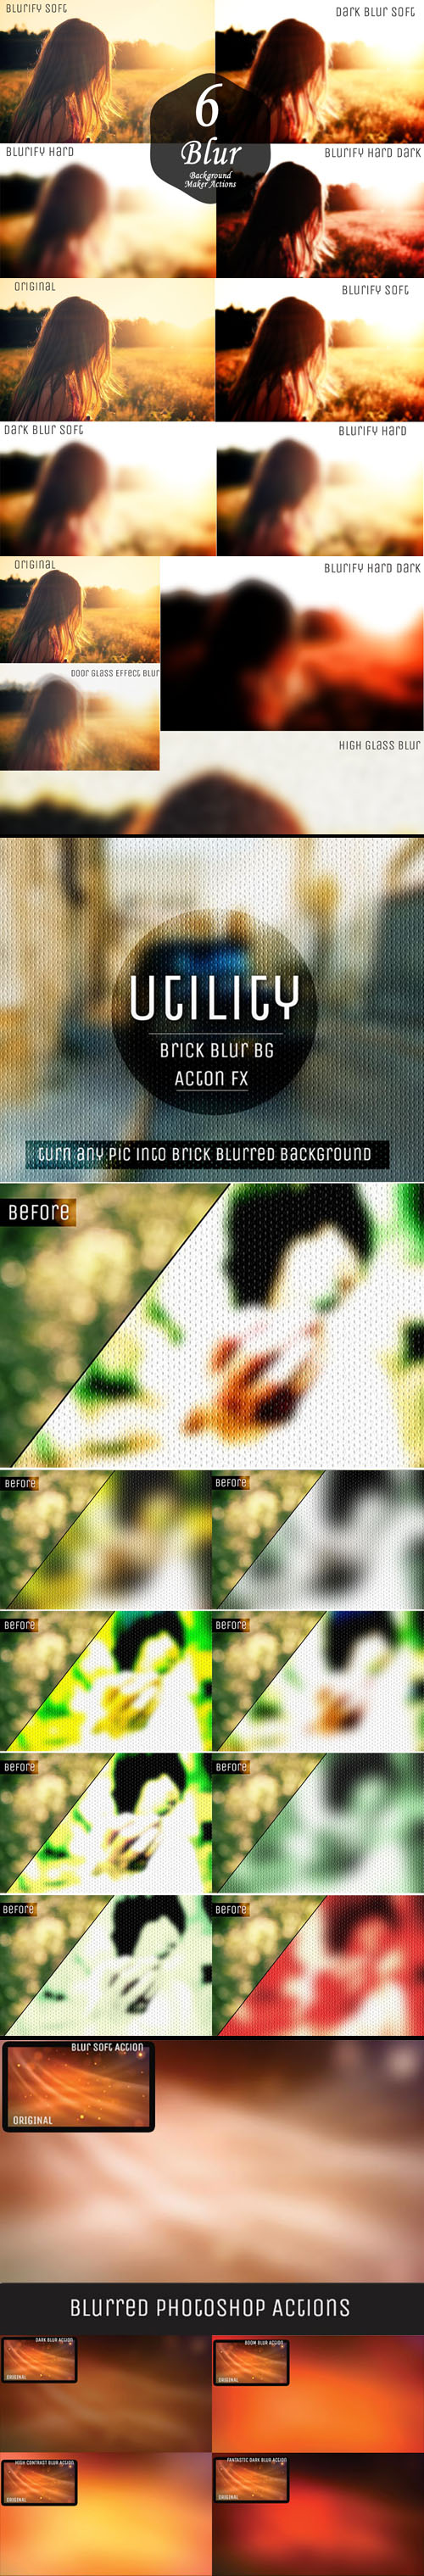 20 Blur Background Maker Actions for Photoshop (RAW/JPEG)